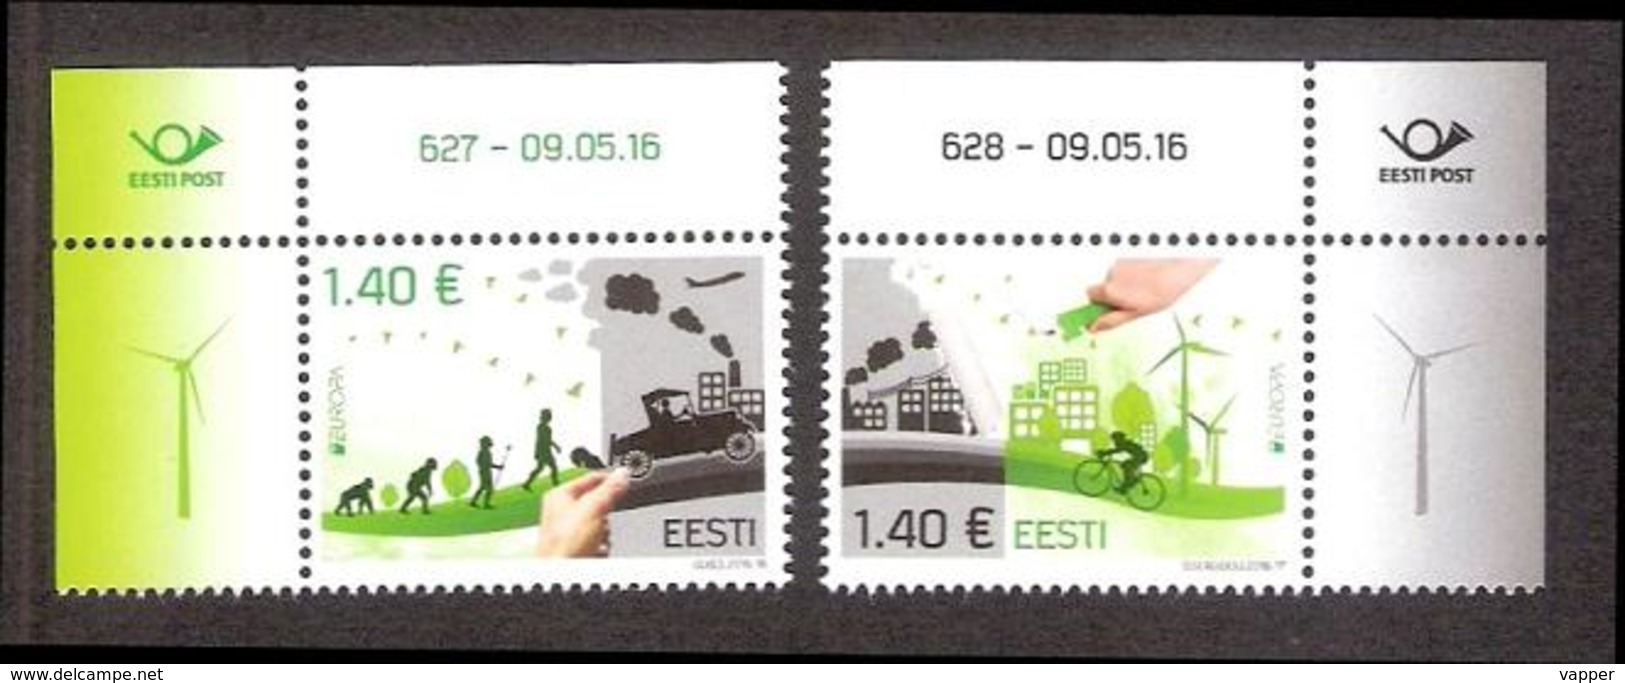 EUROPA - Think Green  Estonia 2016 MNH 2 Corner Stamps With Issue Number Mi 861-62 - 2016